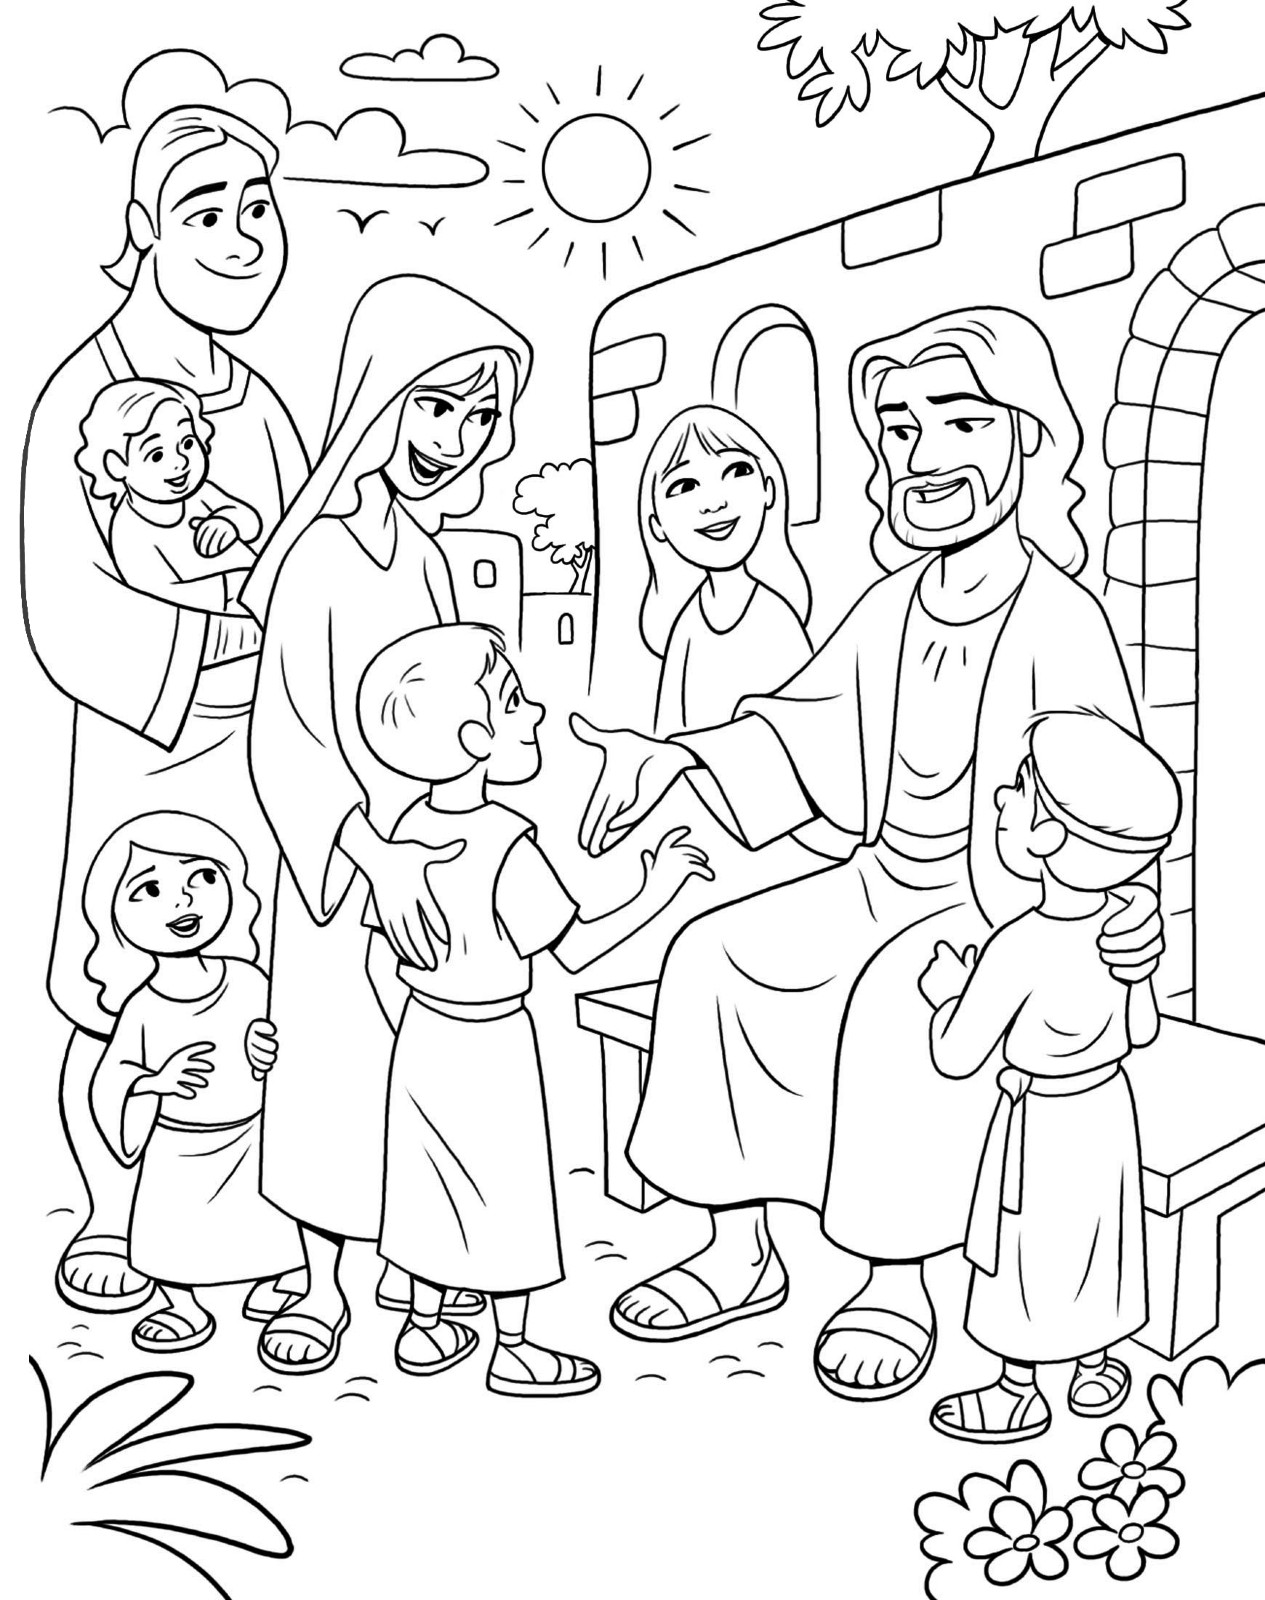 Jesus And The Children Coloring Page
 Christ Meeting the Children